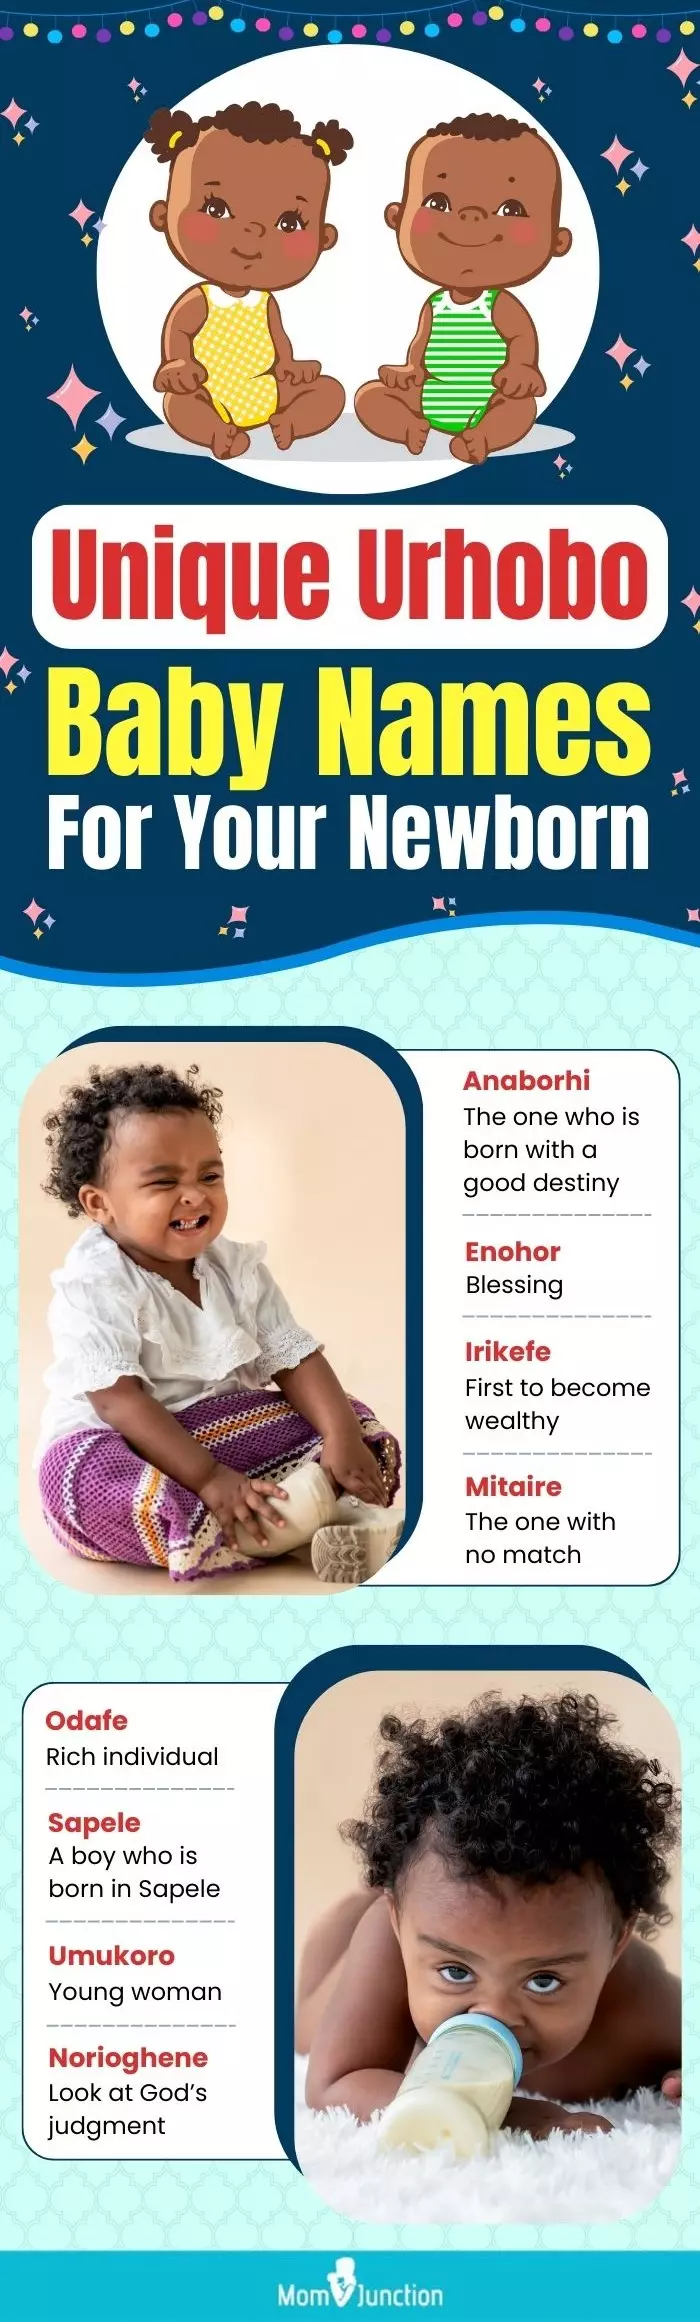 unique urhobo baby names for your newborn updated (infographic)